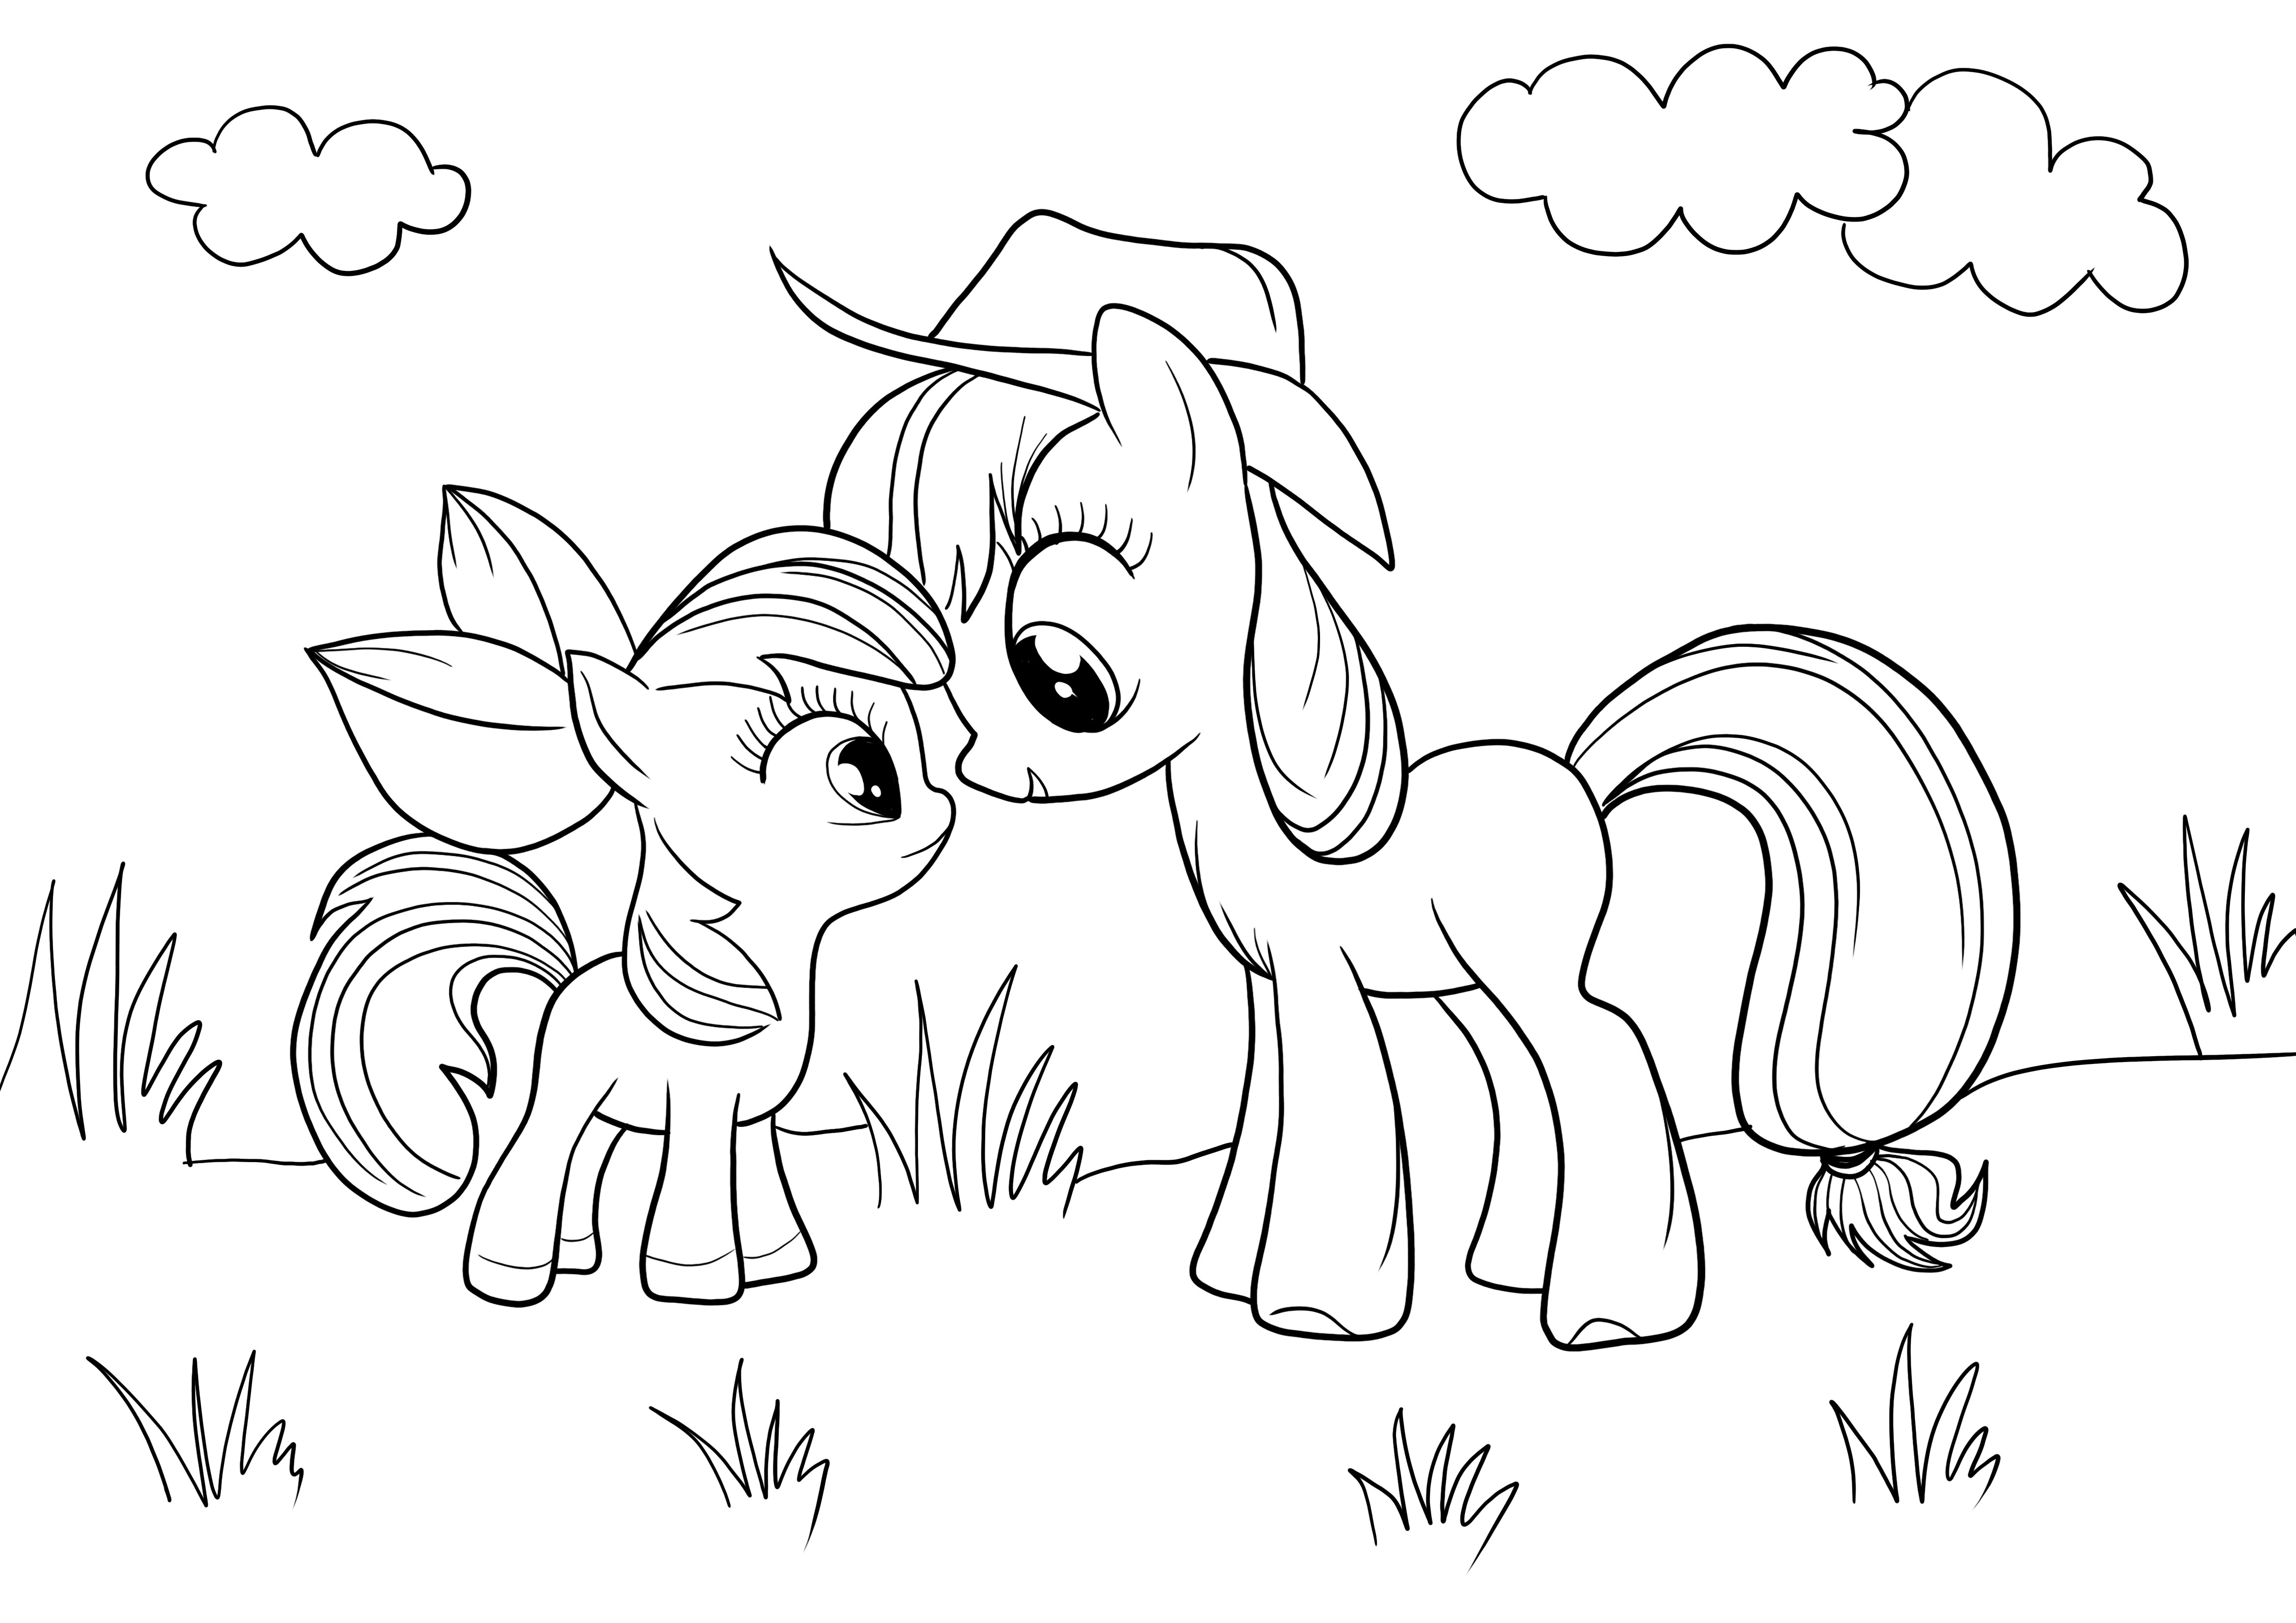 little pony siblings to color and download for free